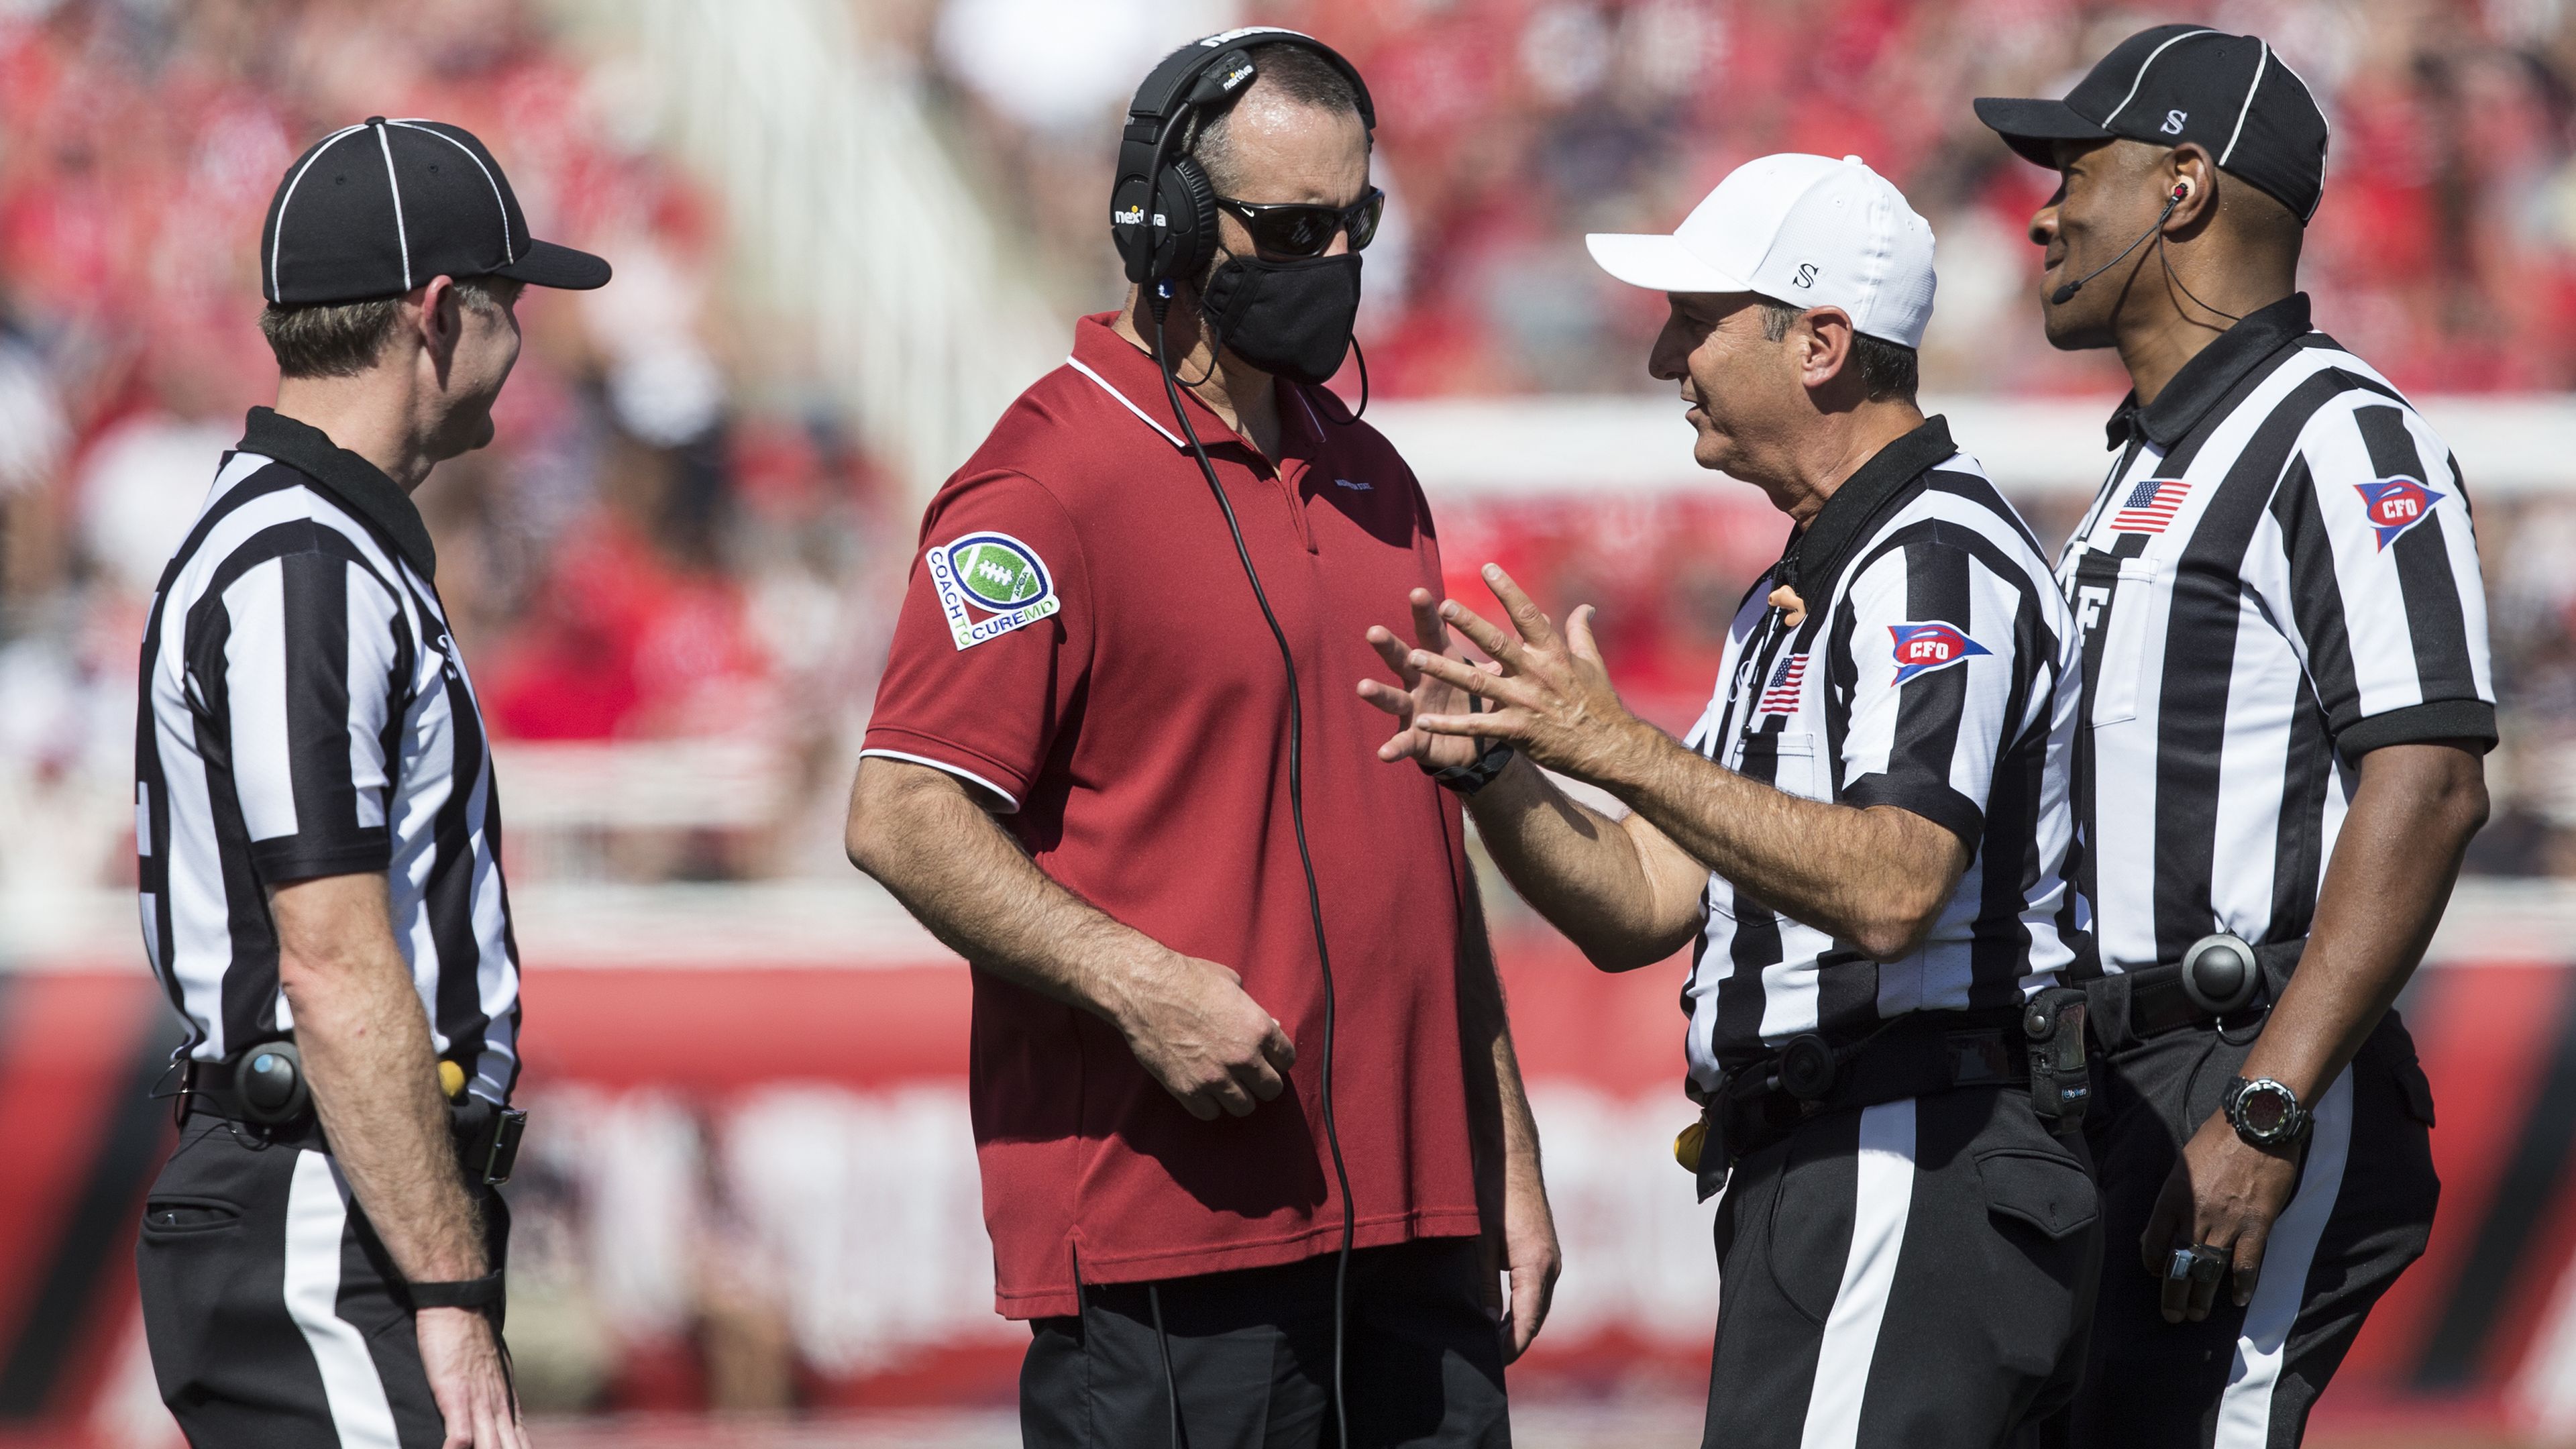 Washington State coach and staff sacked over refusal to get vaccinated